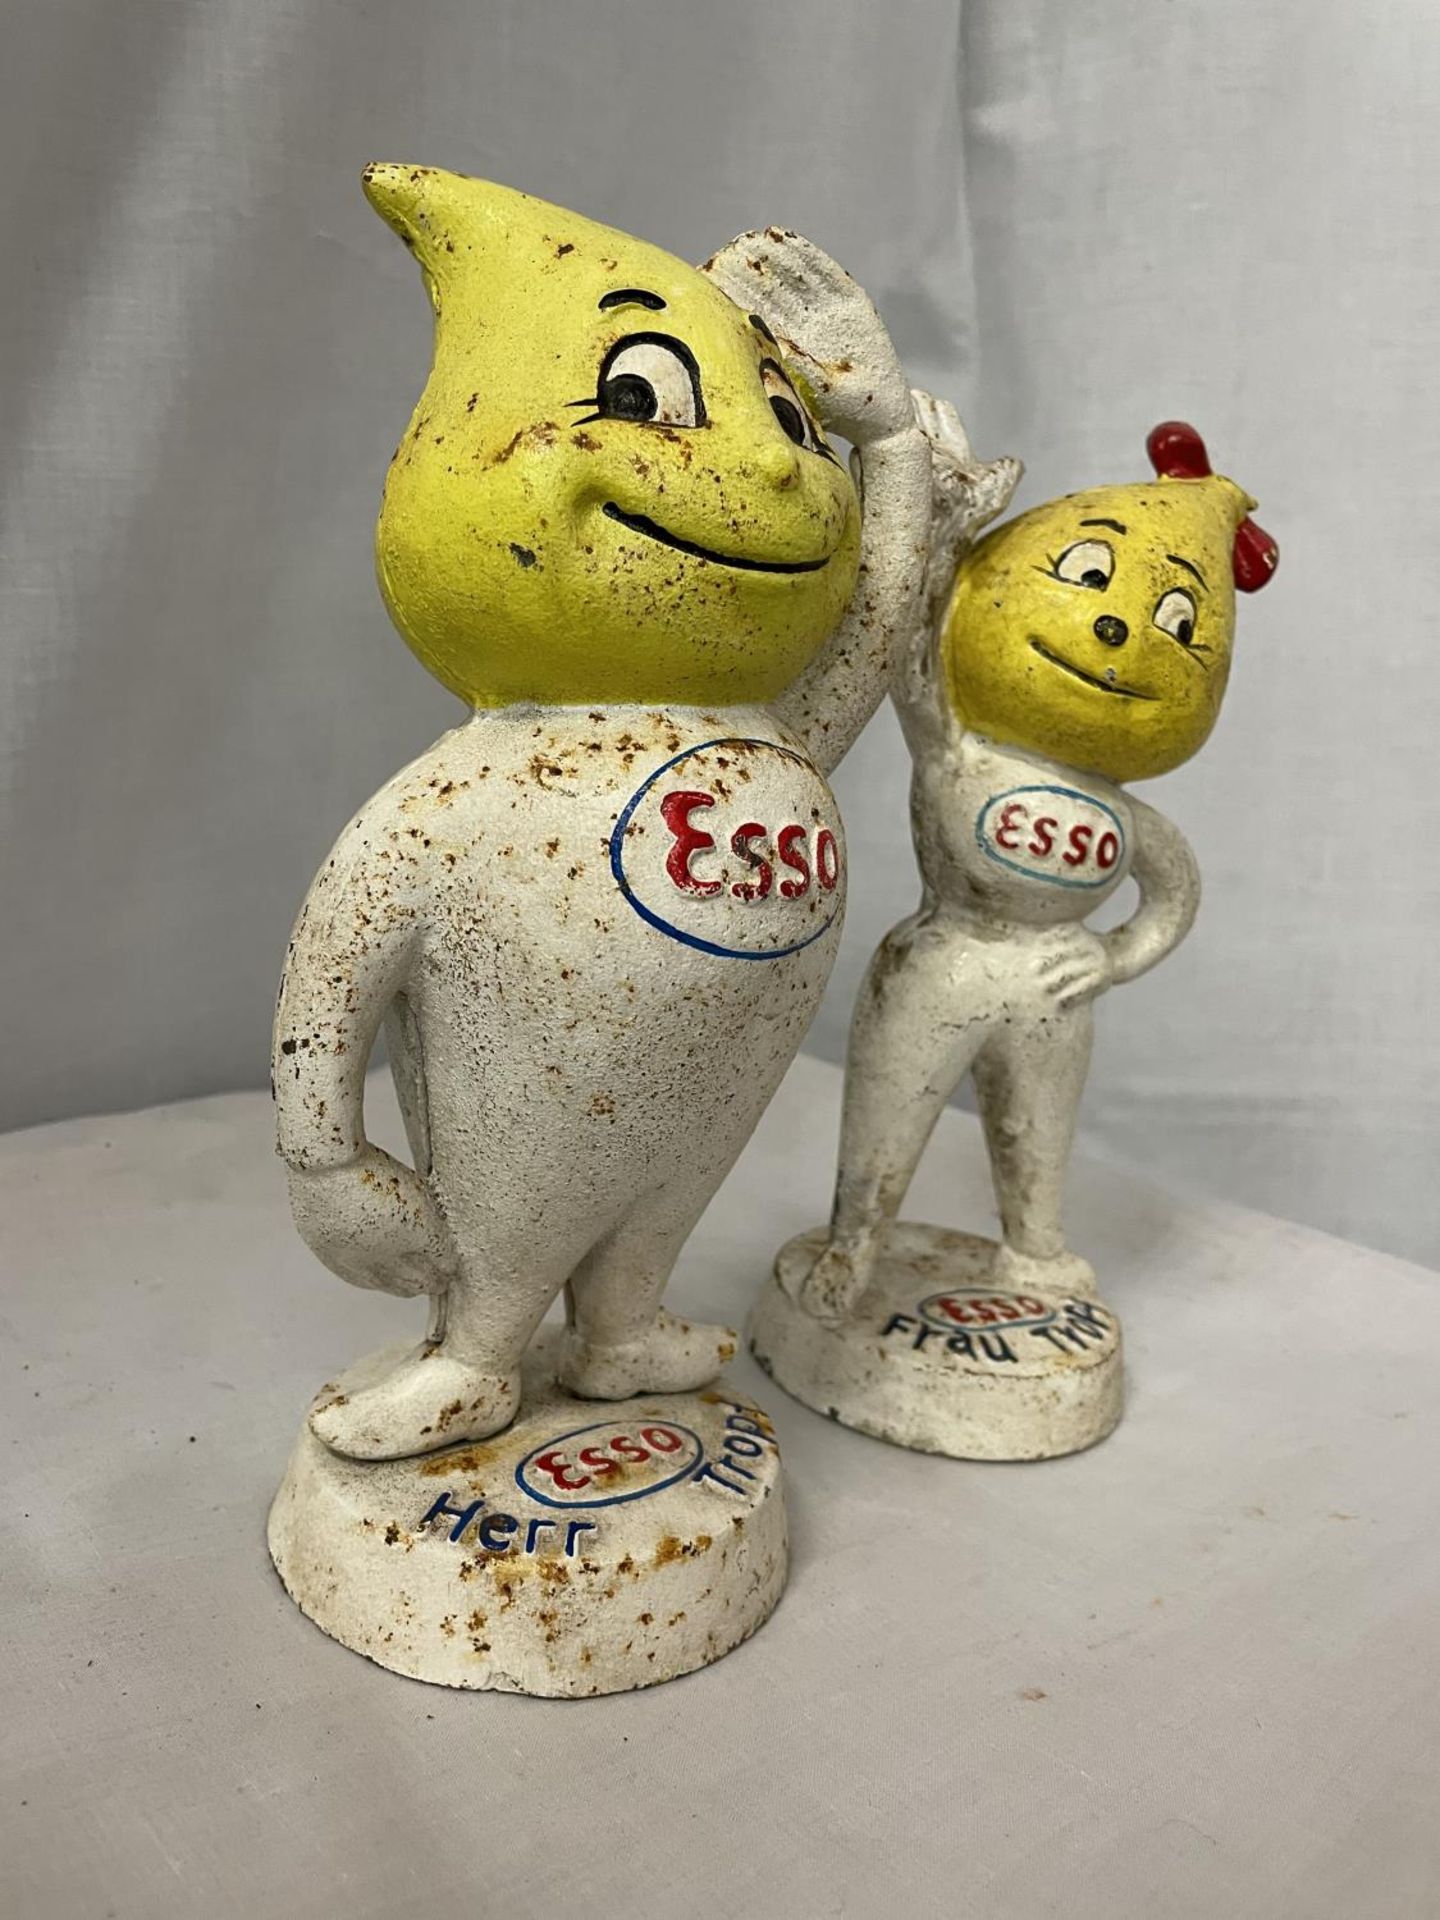 A PAIR OF METAL ESSO STYLE FIGURES - FRAU UND HERR TROPF APPROX 23CM HIGH - Image 2 of 4